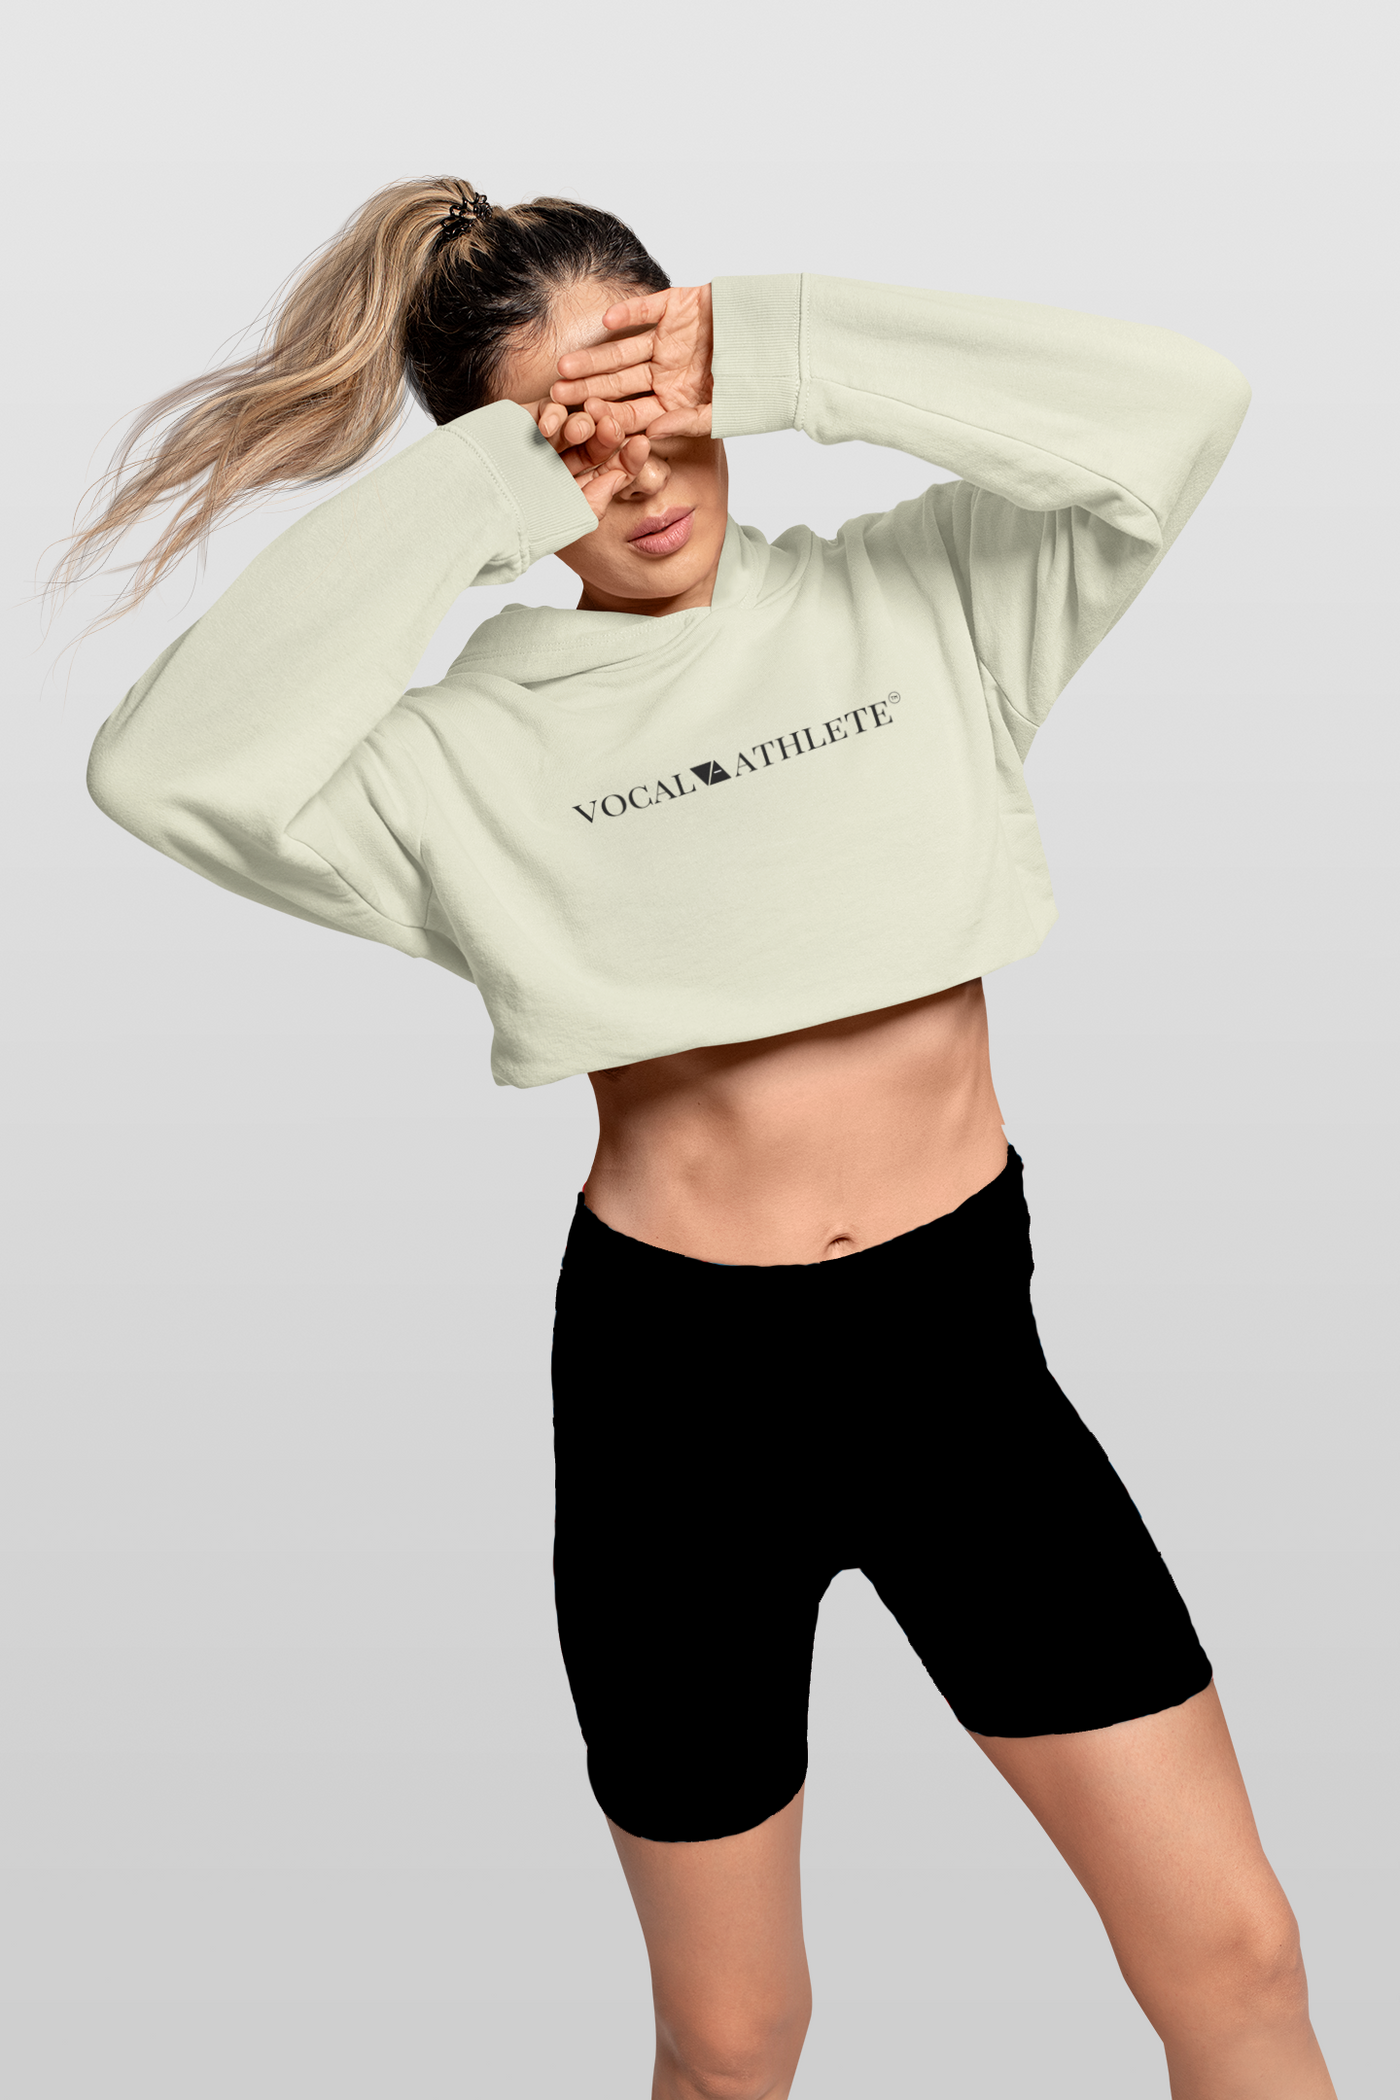 Vocal Athlete Cropped Hoodie - (ONLY)